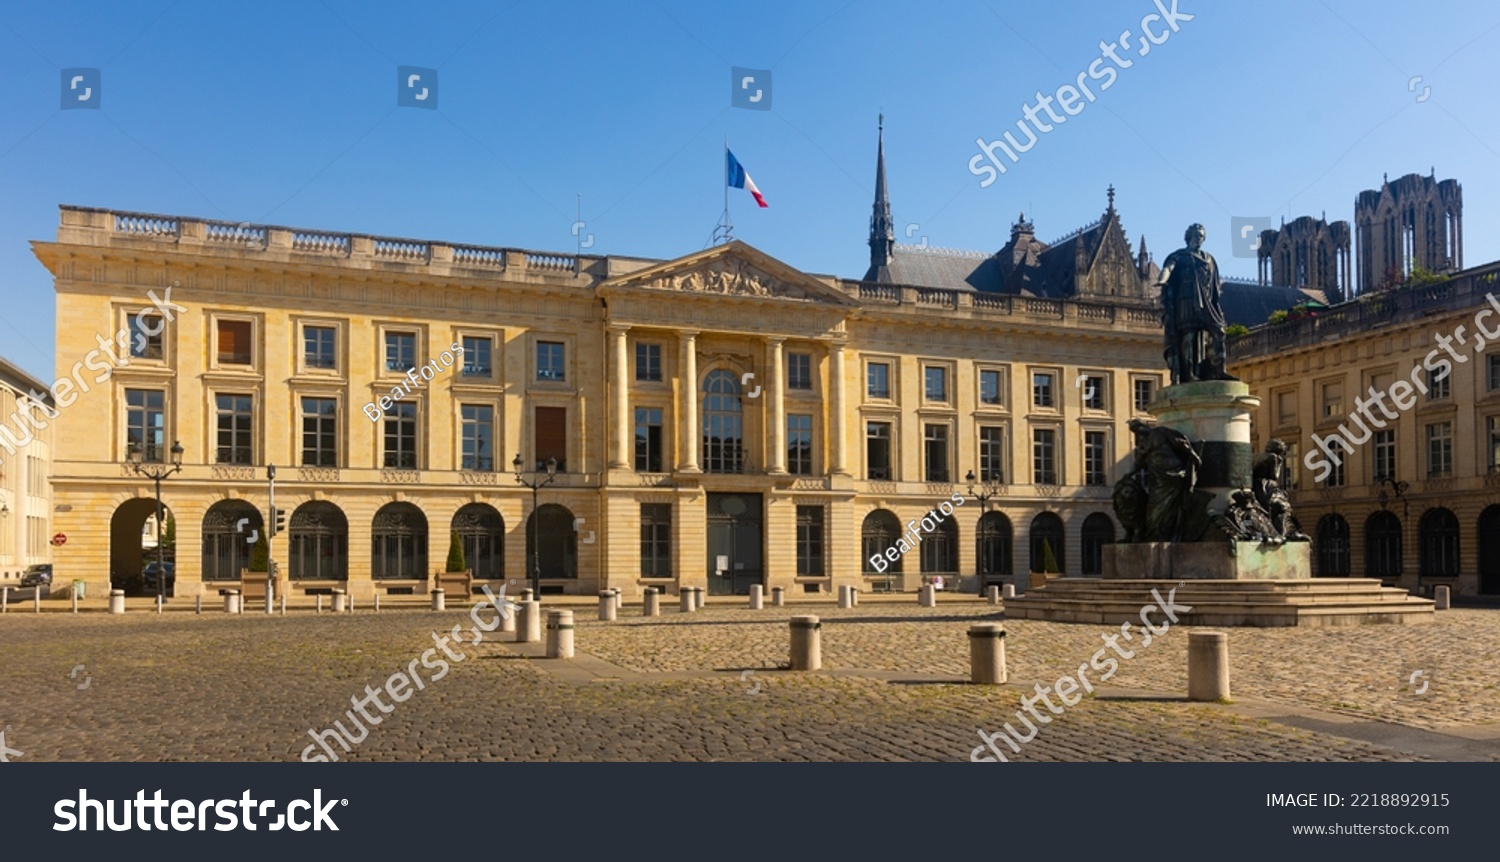 Place Royale with bronze statue of king Louis XV of France. Reims, Grand Est region. #2218892915